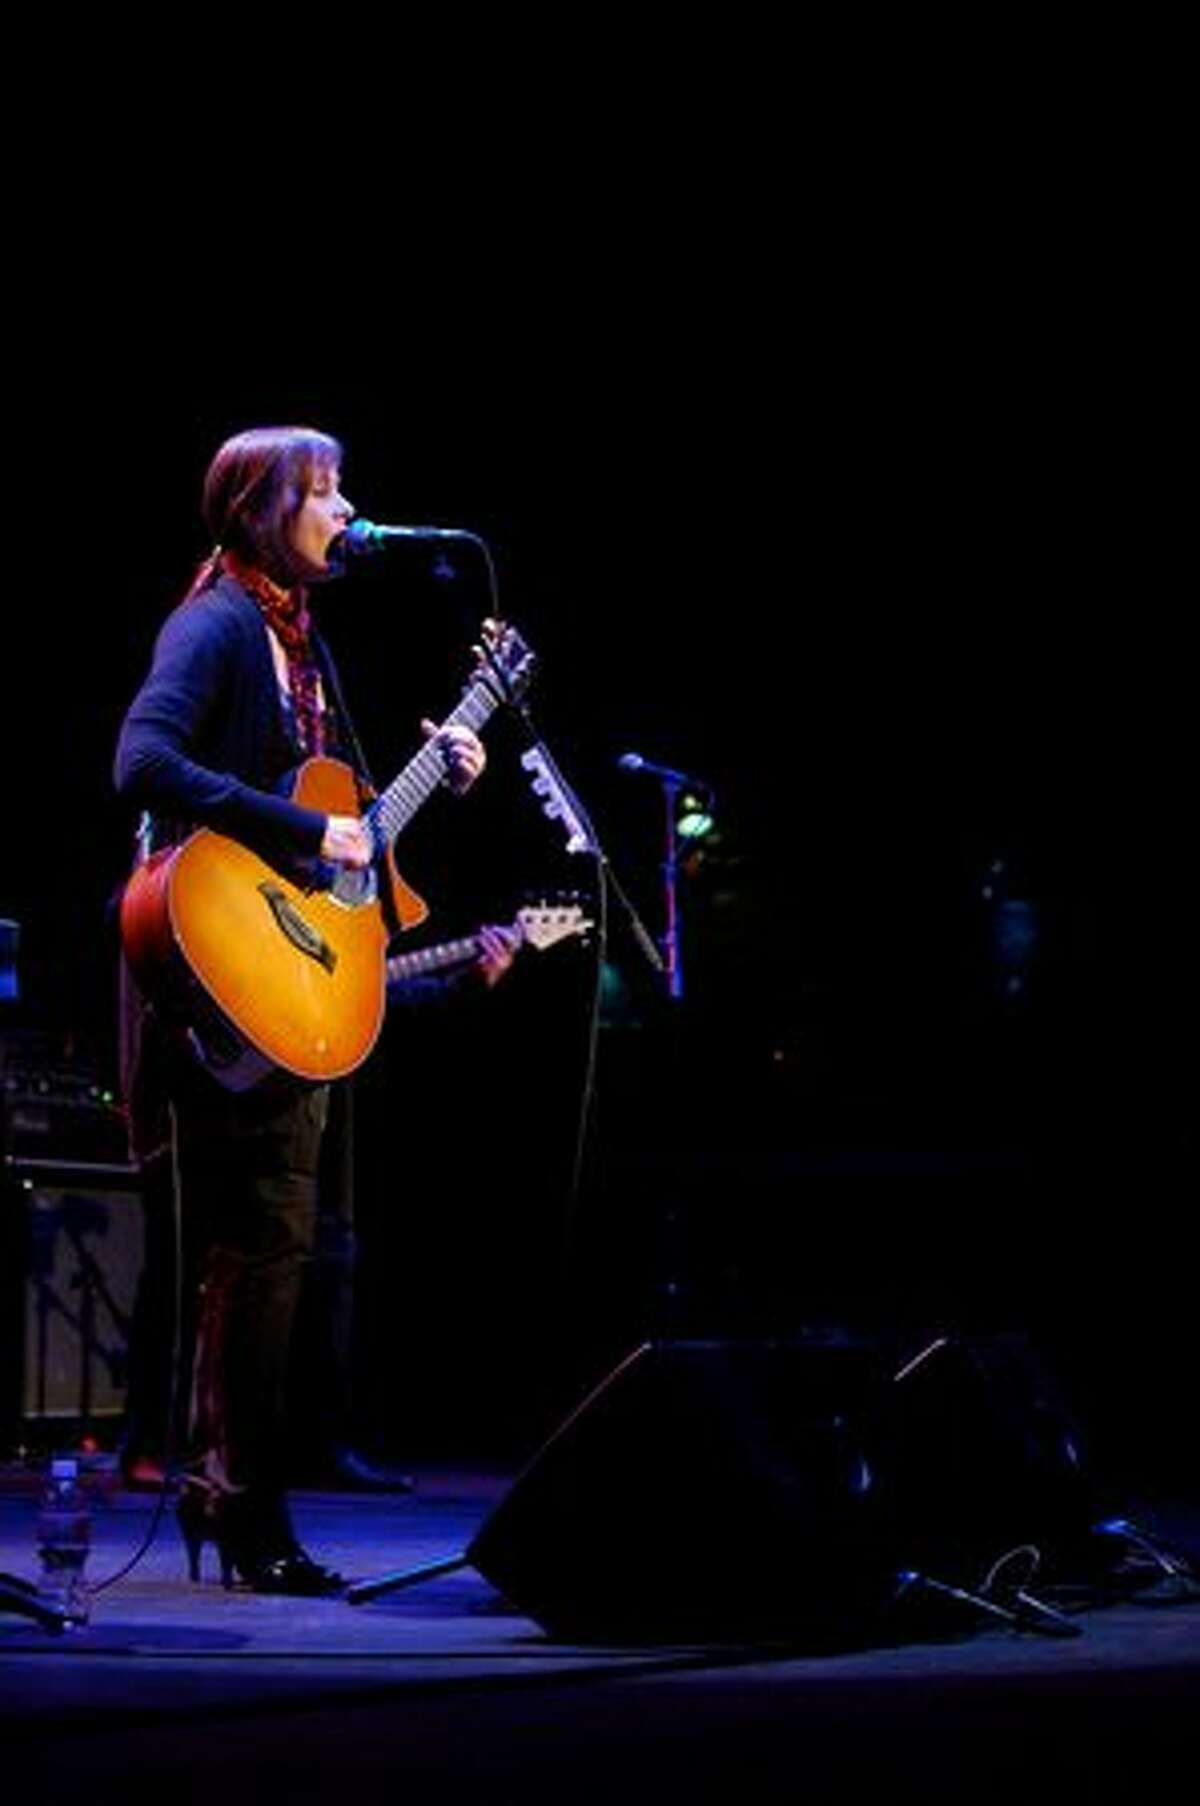 Suzanne Vega performs at the Moore Theatre on Feb. 25. (Kam Martin / seattlepi.com)